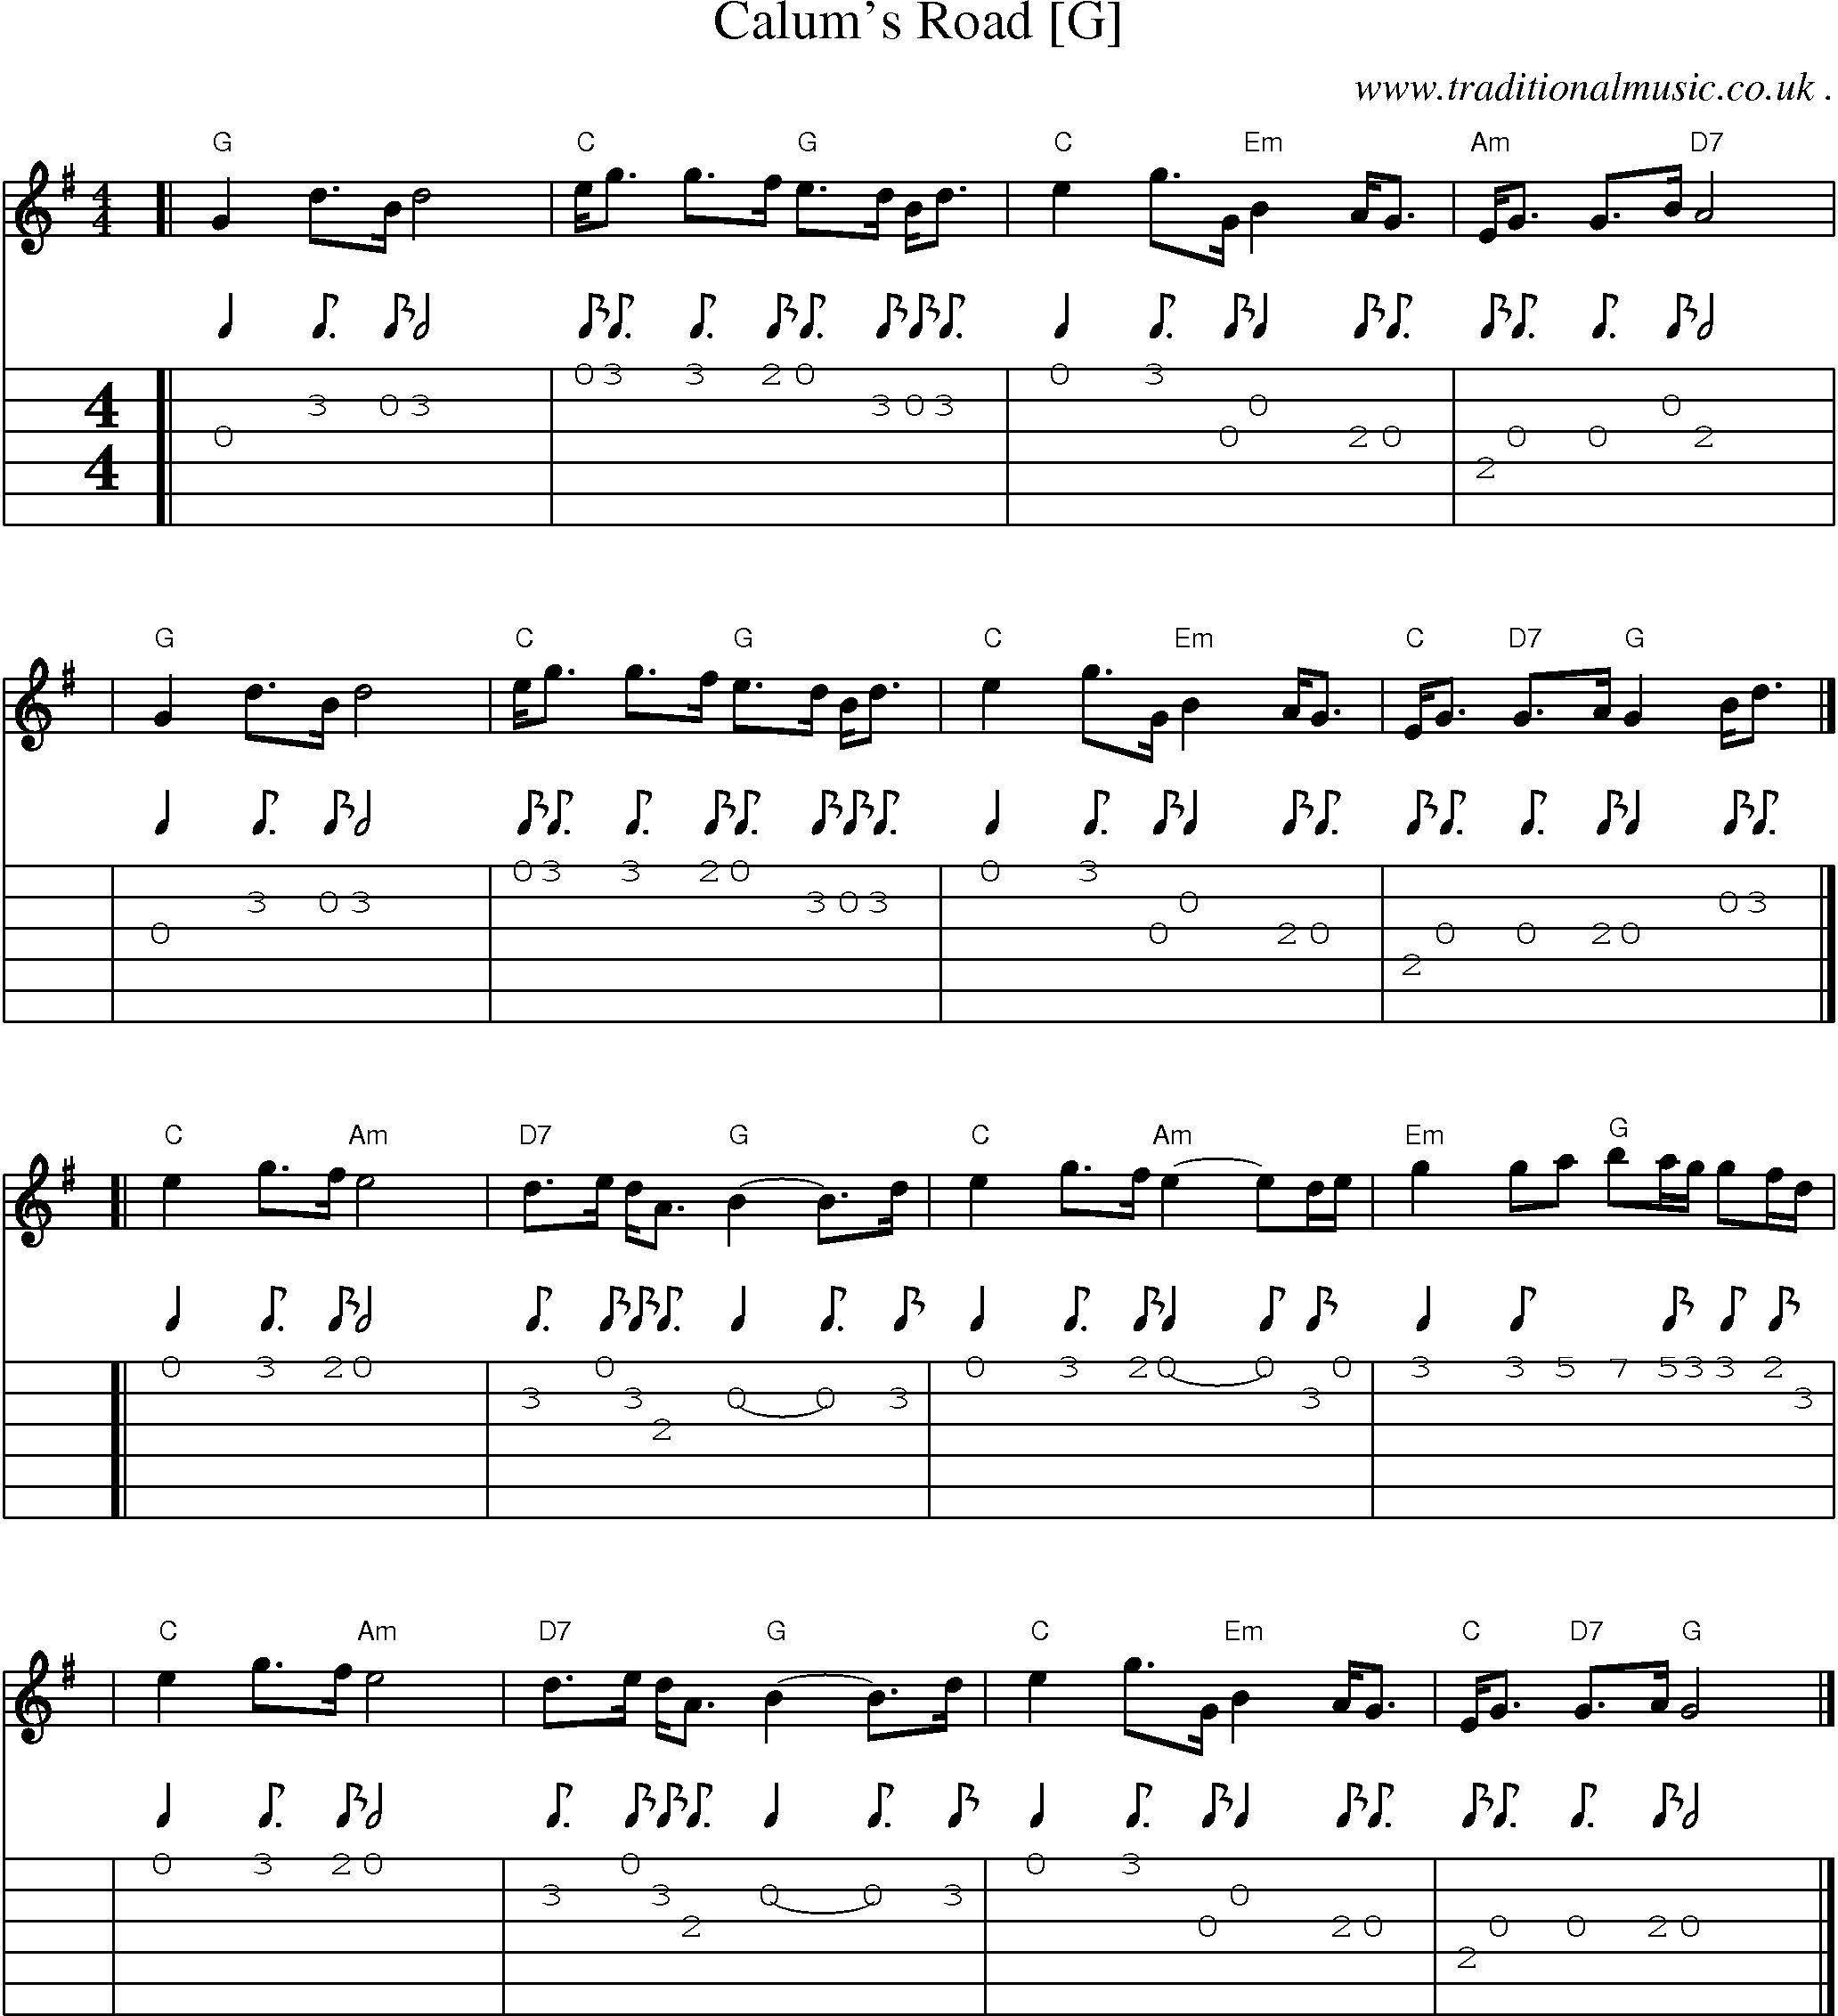 Sheet-music  score, Chords and Guitar Tabs for Calums Road [g]